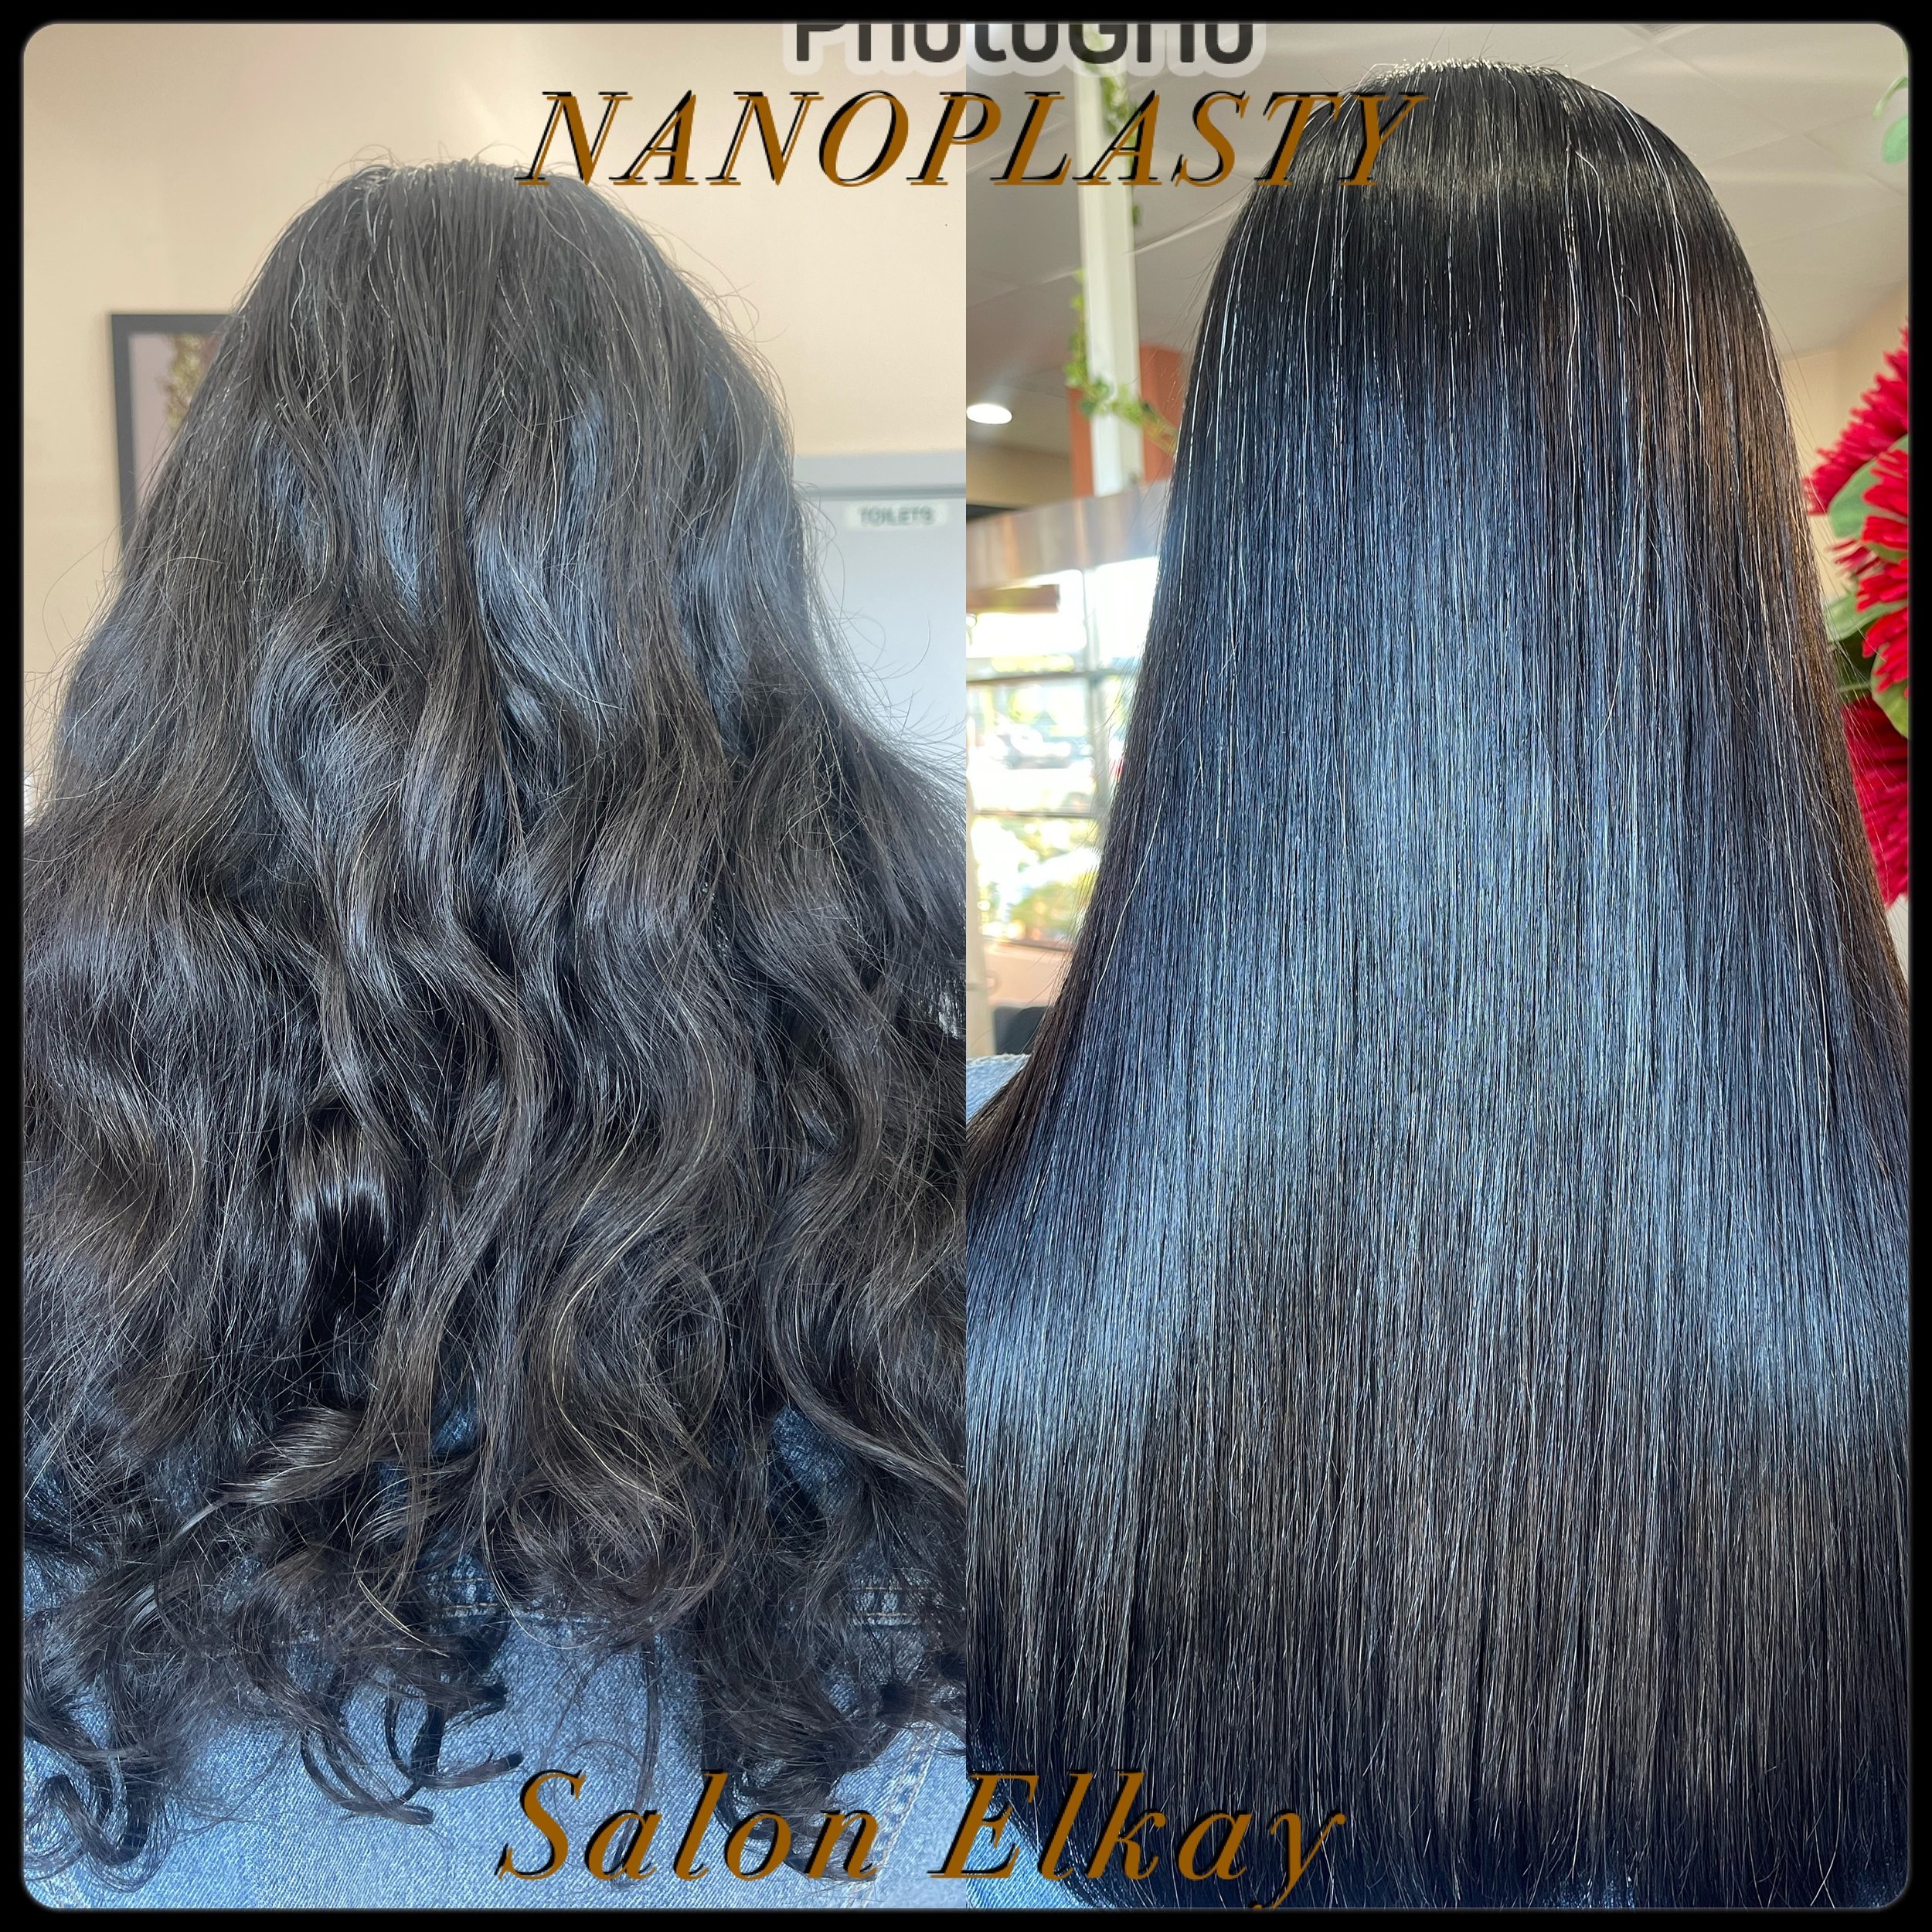 NANOPLASTY TREATMENT
See the difference and wonders that
Nano Pro can do because of its amazing ingredients that has no harmful chemicals and provenly effective!~
Try Nanoplasty today!
#nanoplastyhairtreatment #chemicalfree #vegan #hairsalon #beautys